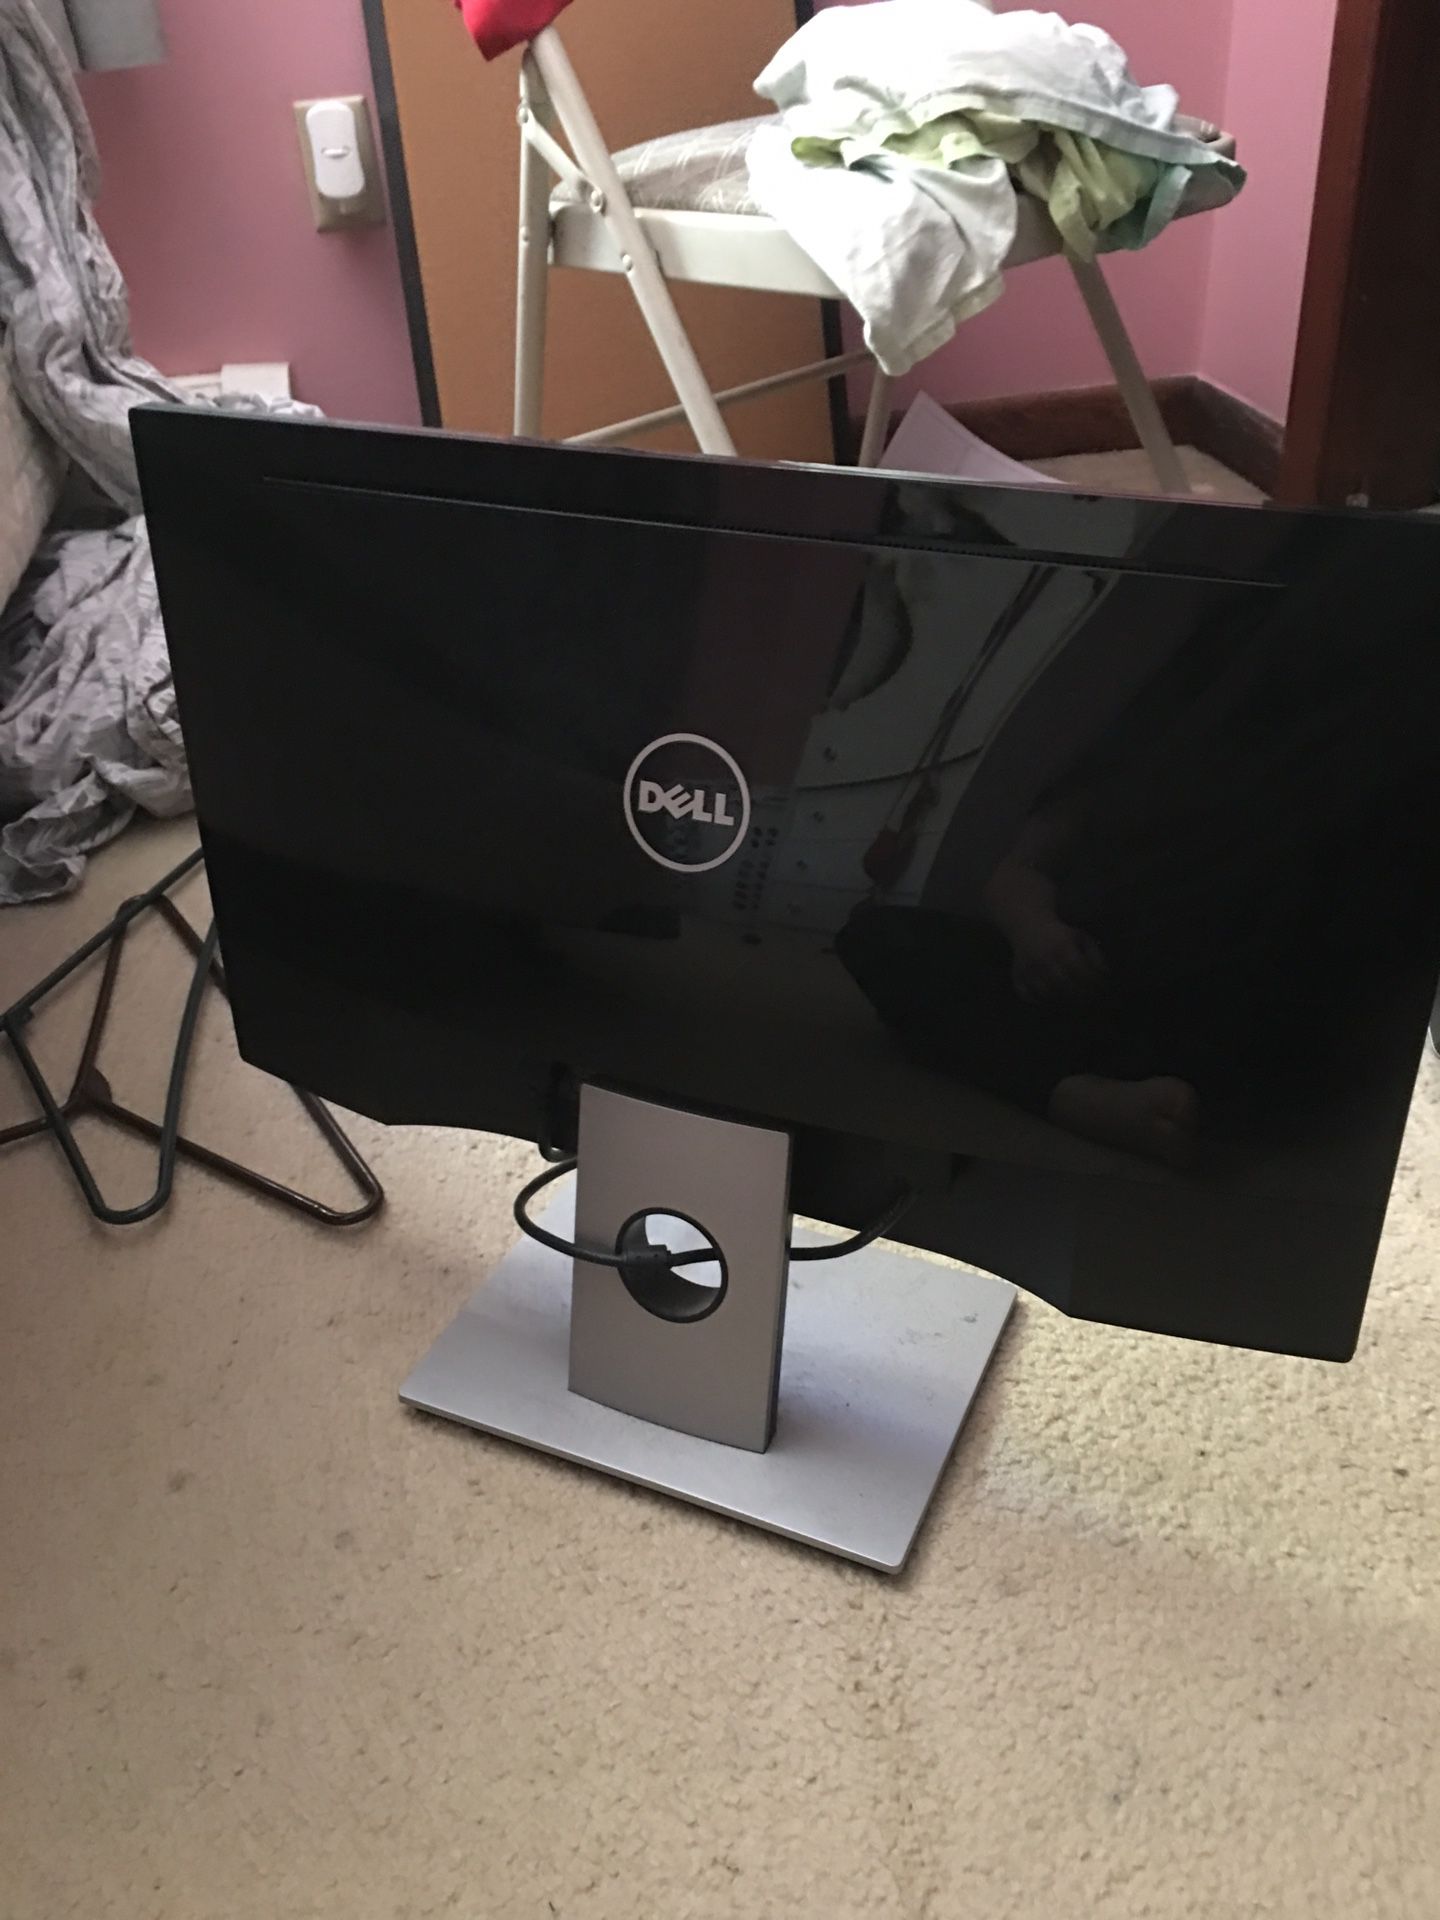 Dell monitor barely used